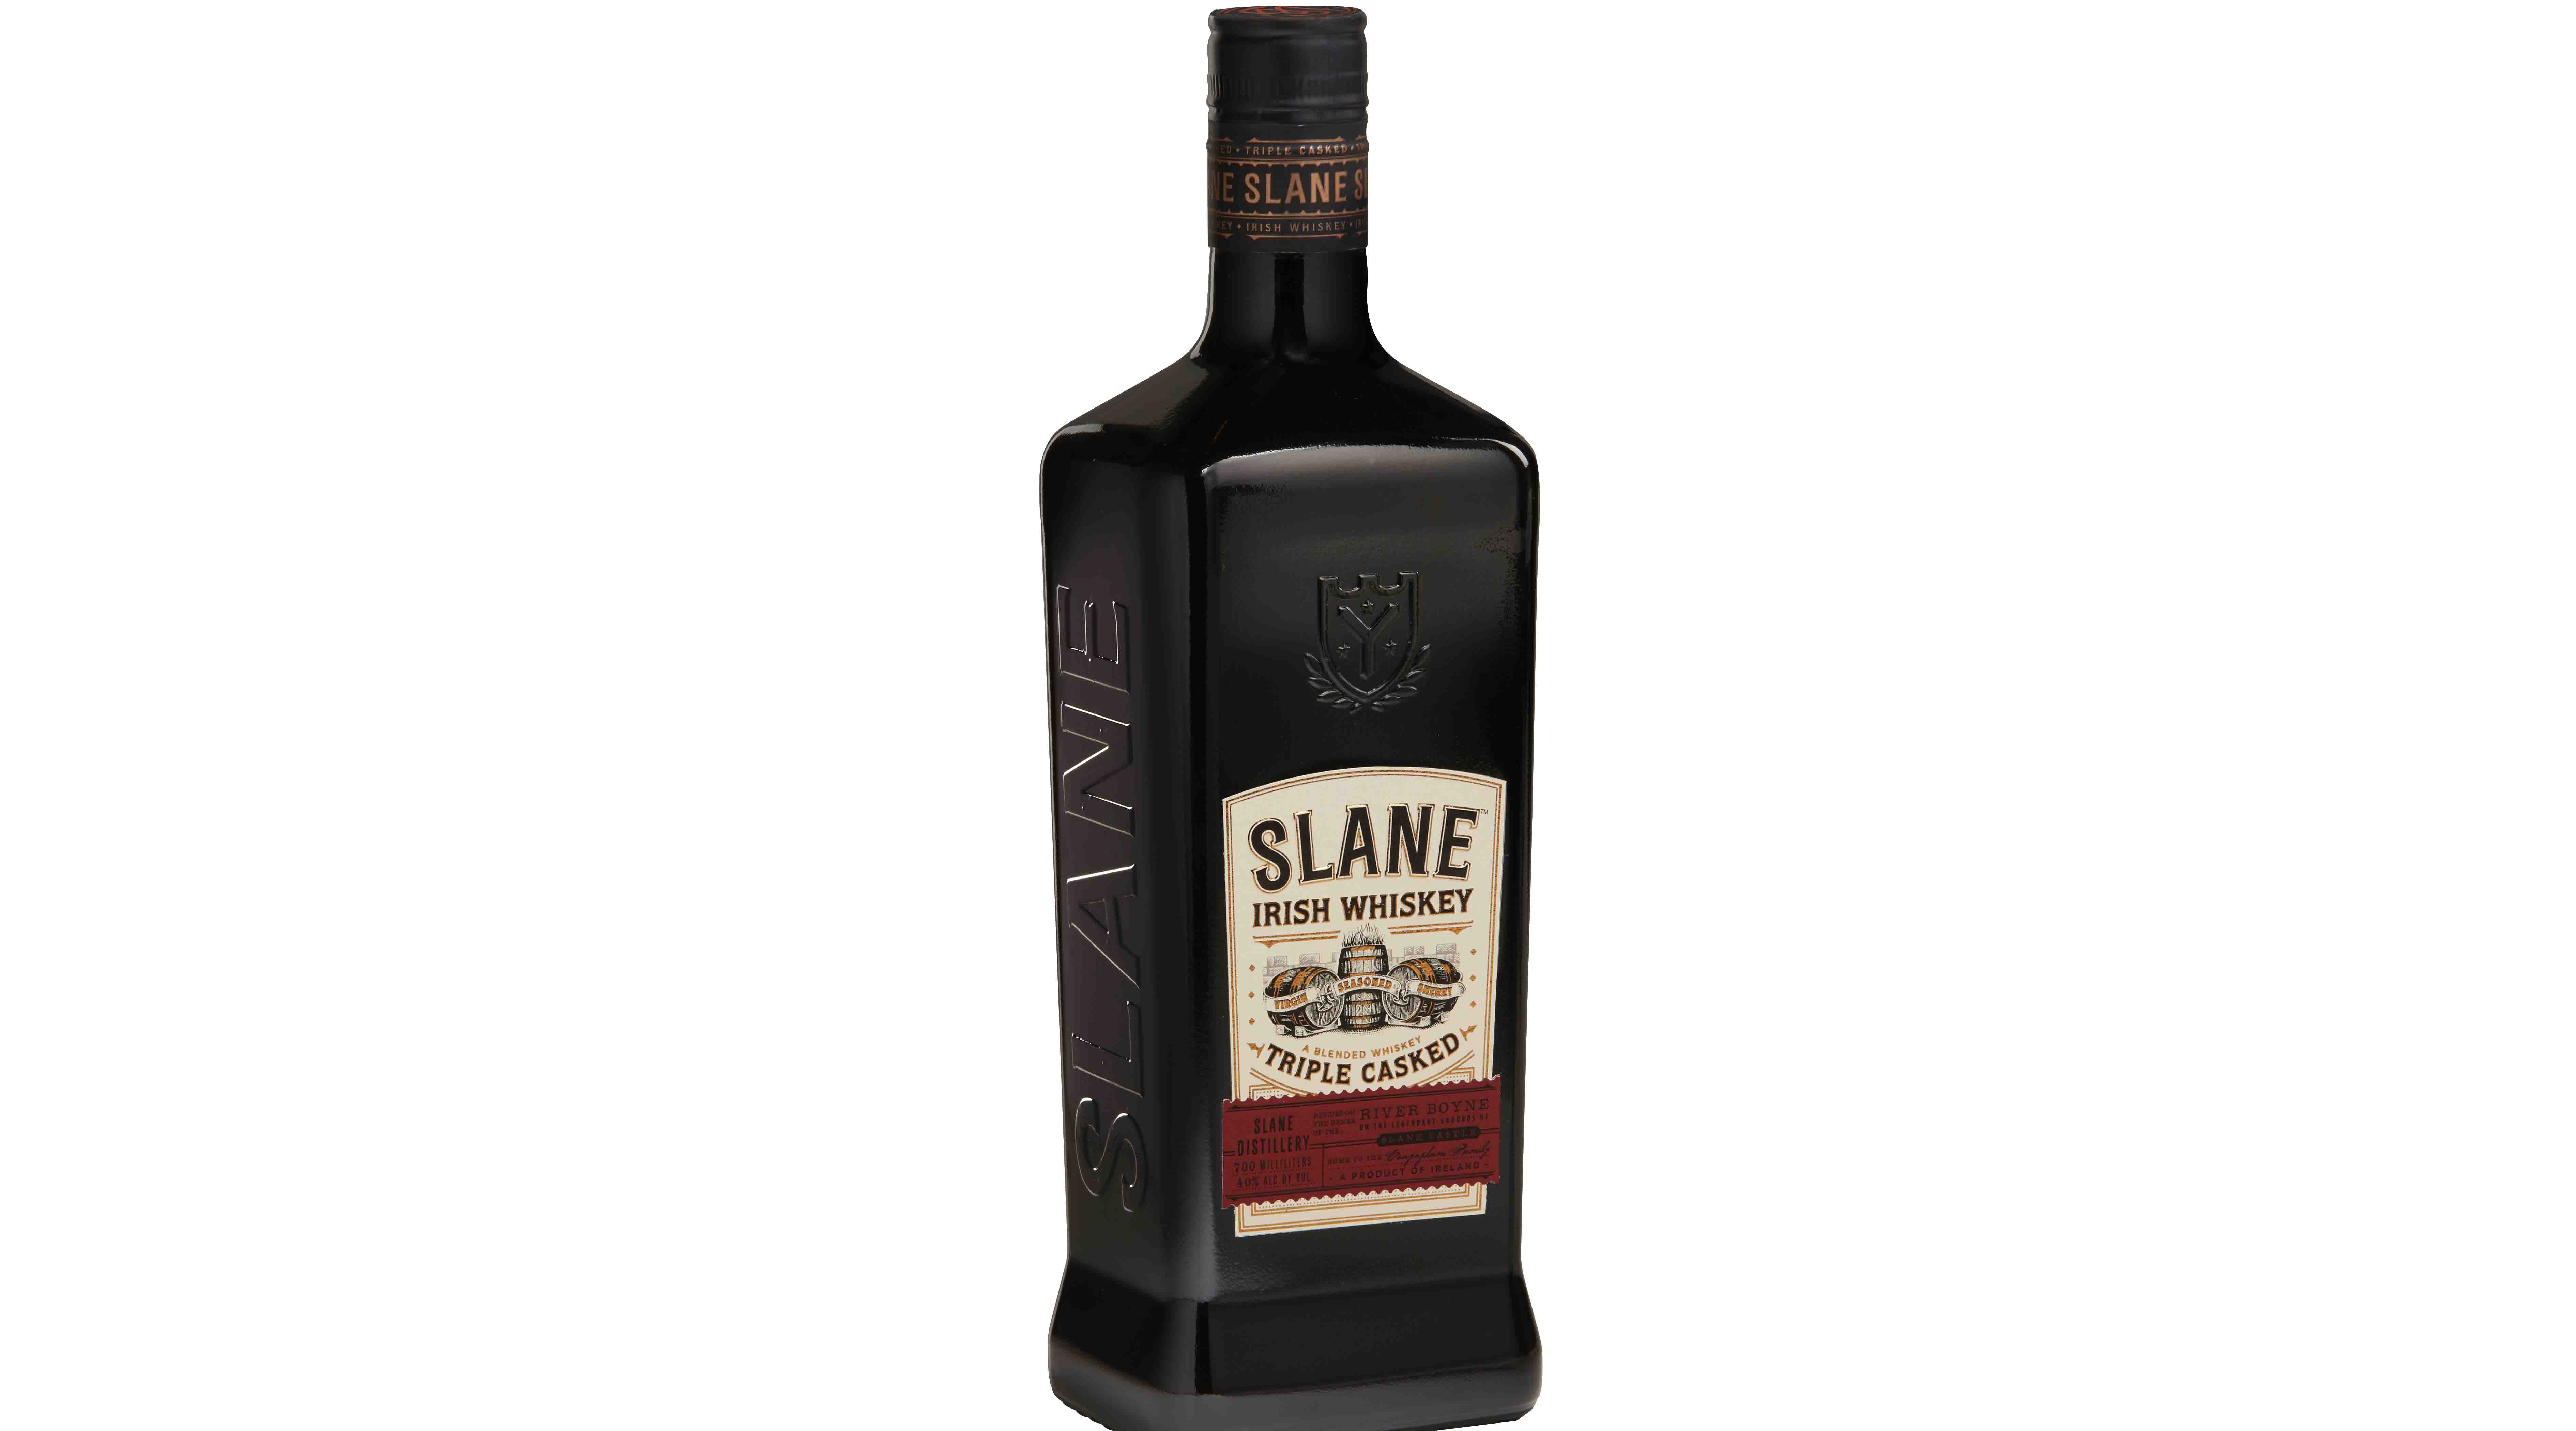 A triple-cask maturation through the use of the three different barrels allows Slane Whiskey to customise the final taste.